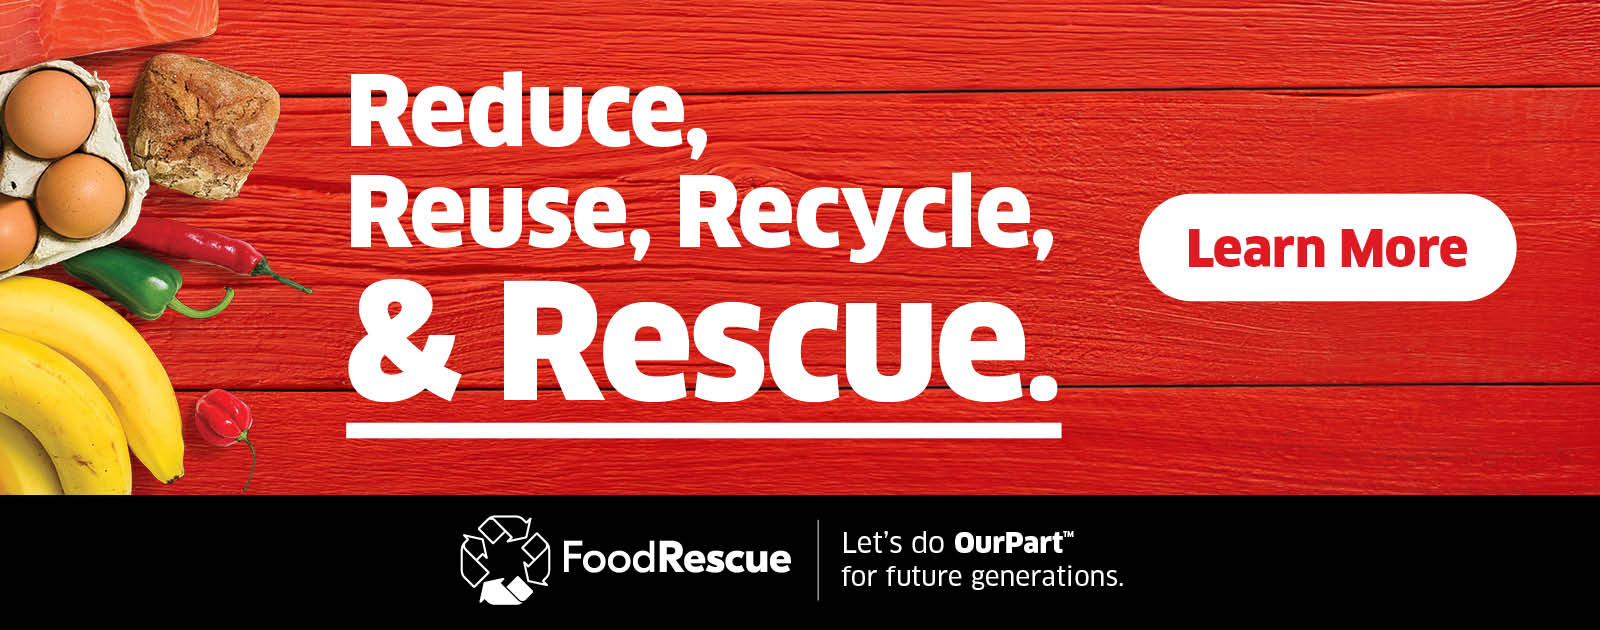 Text Reading 'Reduce, Reuse, Recycle & Rescue.' along with a 'Learn More' button.